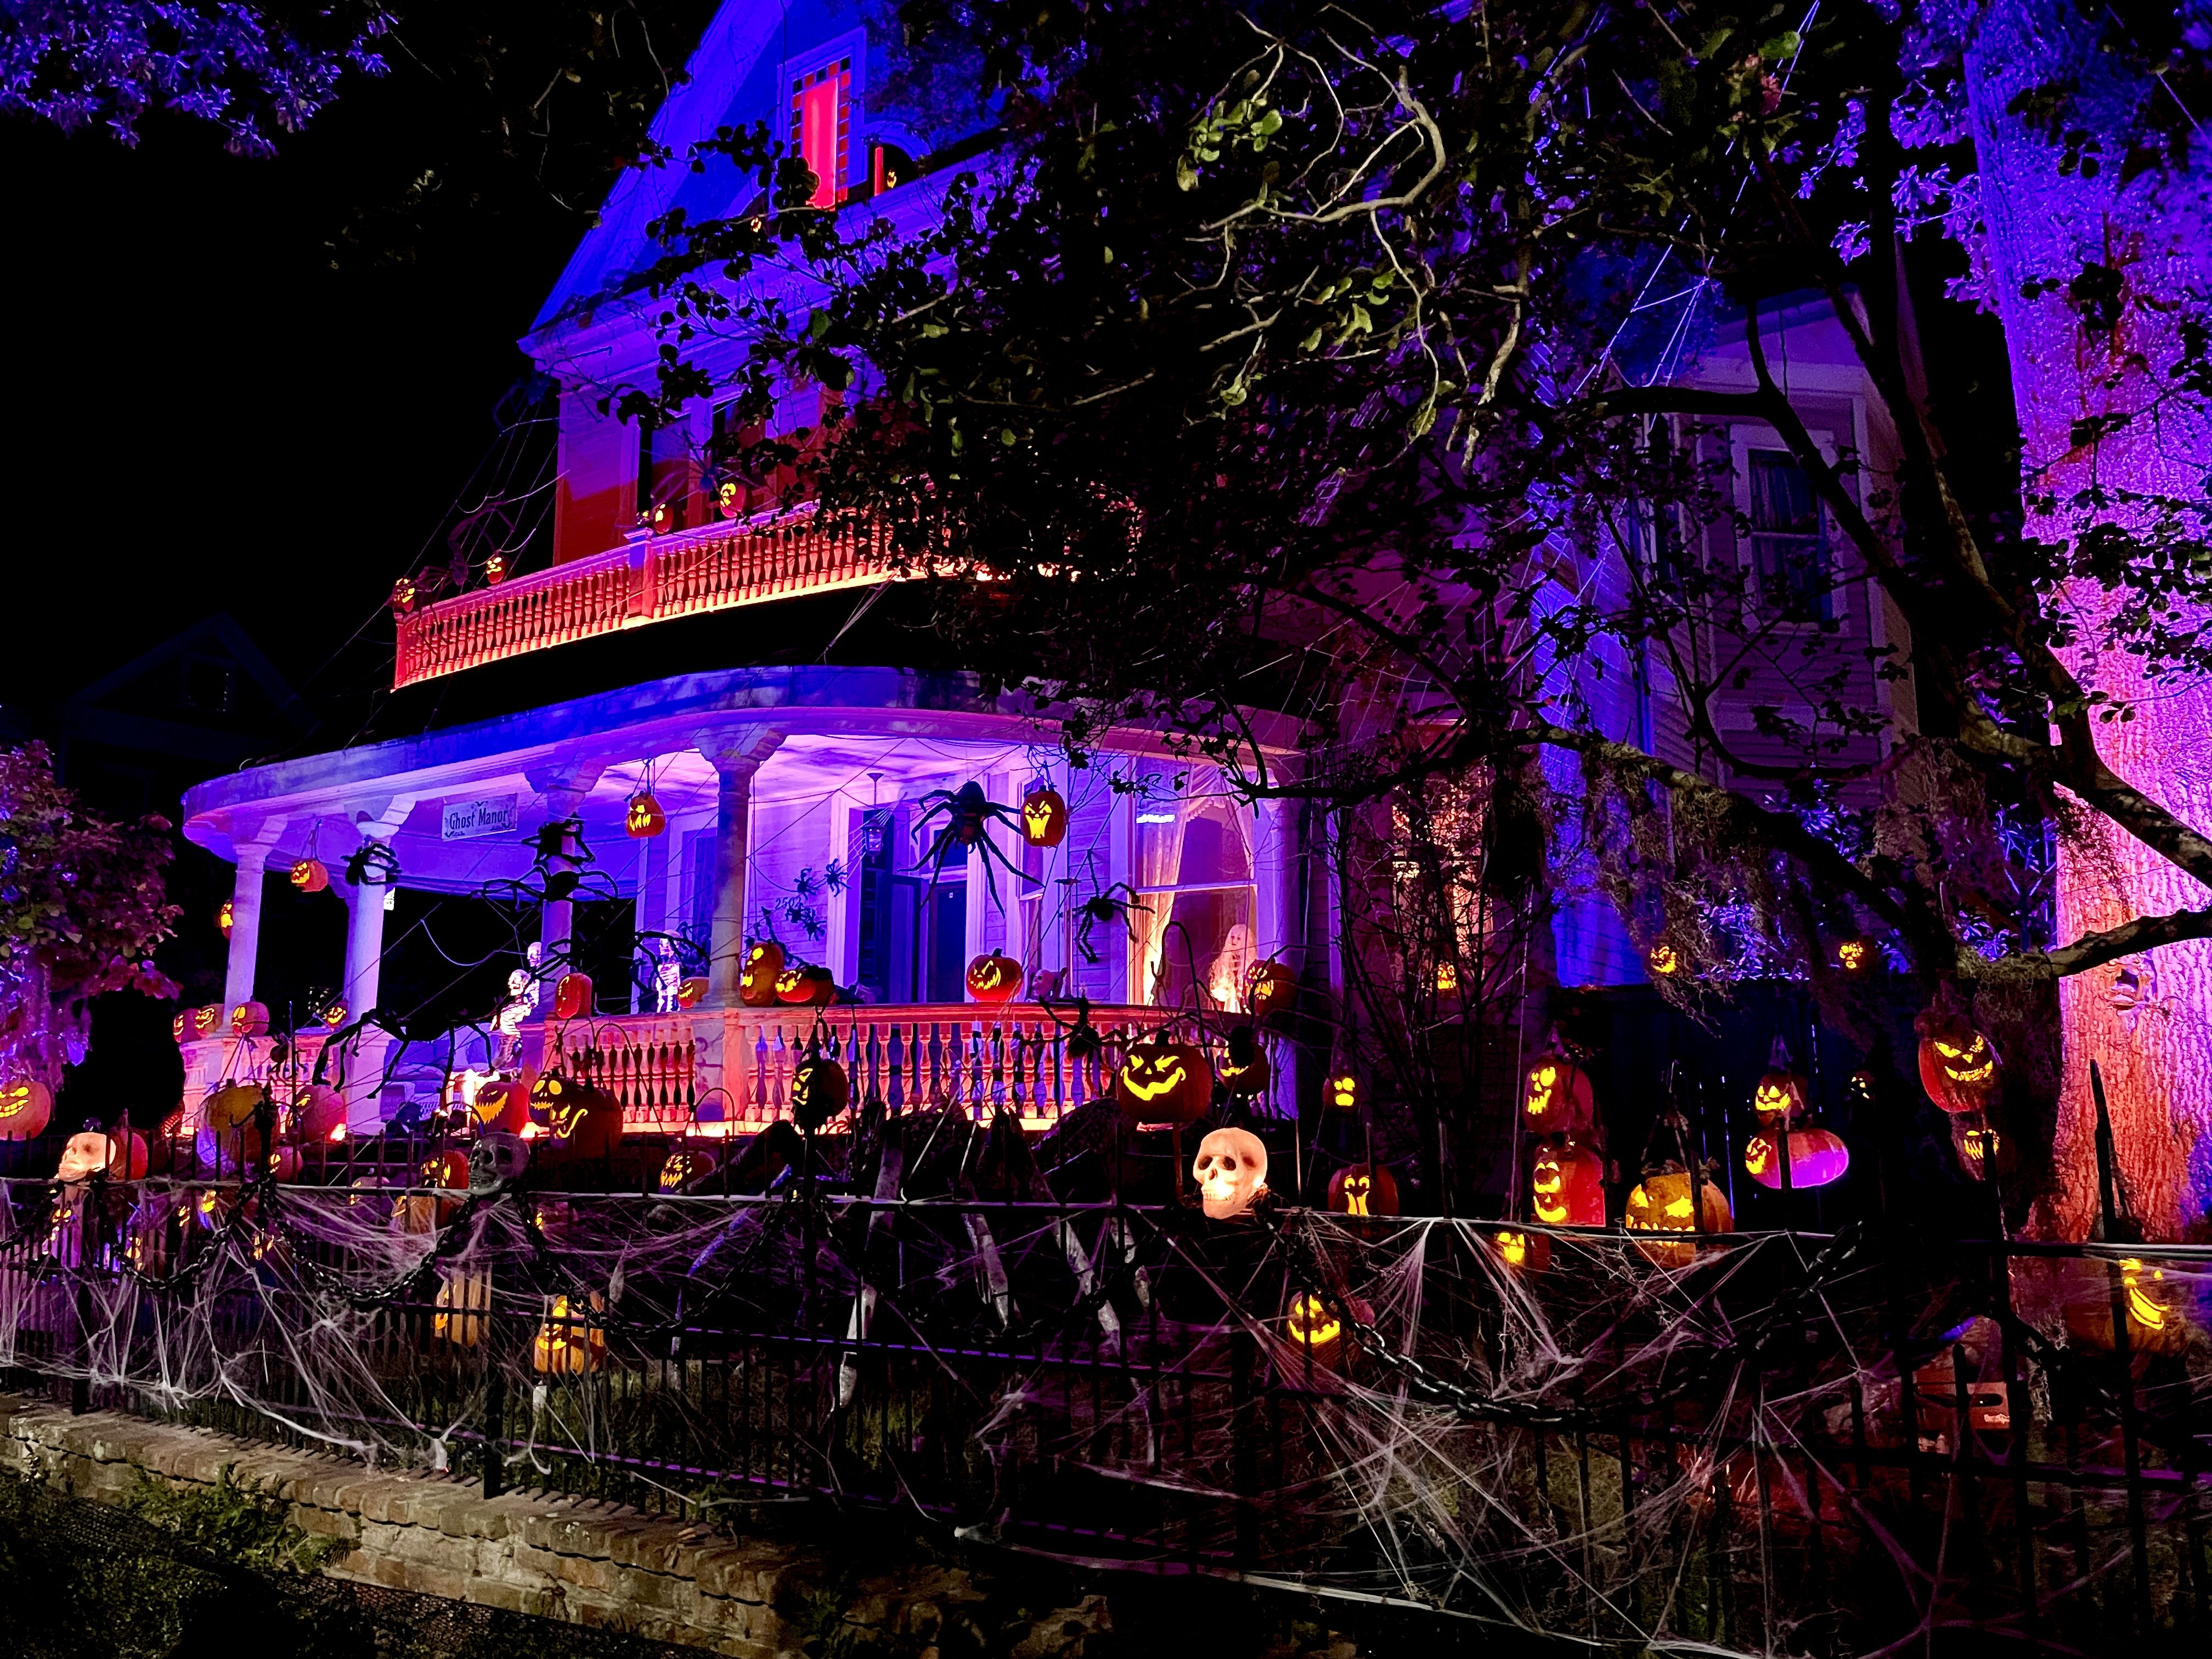 Photo shows a house lit up at night with pumpkins and skeletons